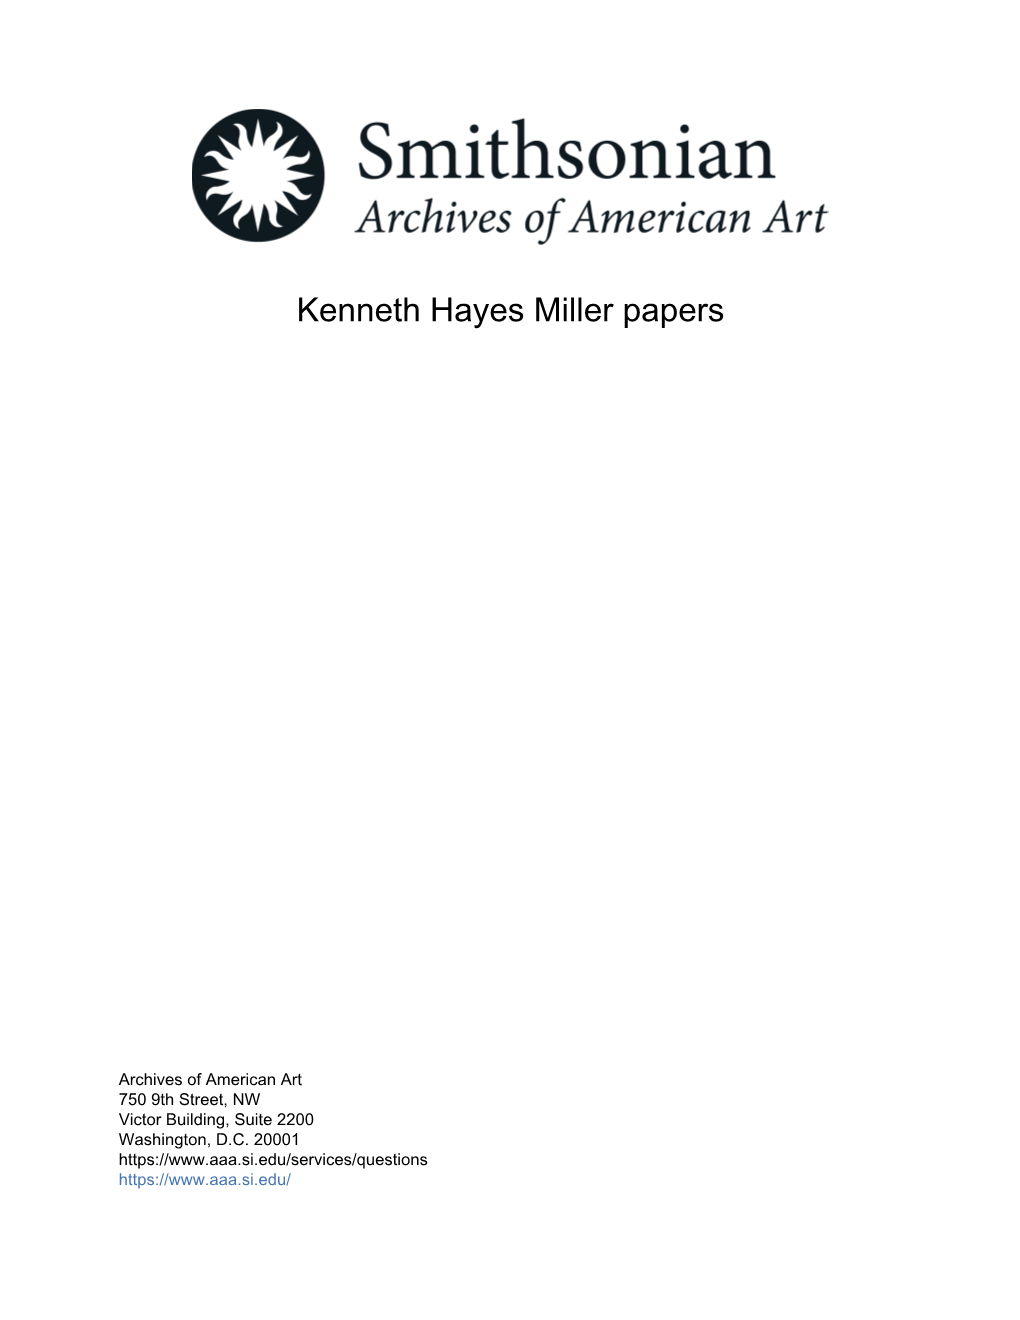 Kenneth Hayes Miller Papers